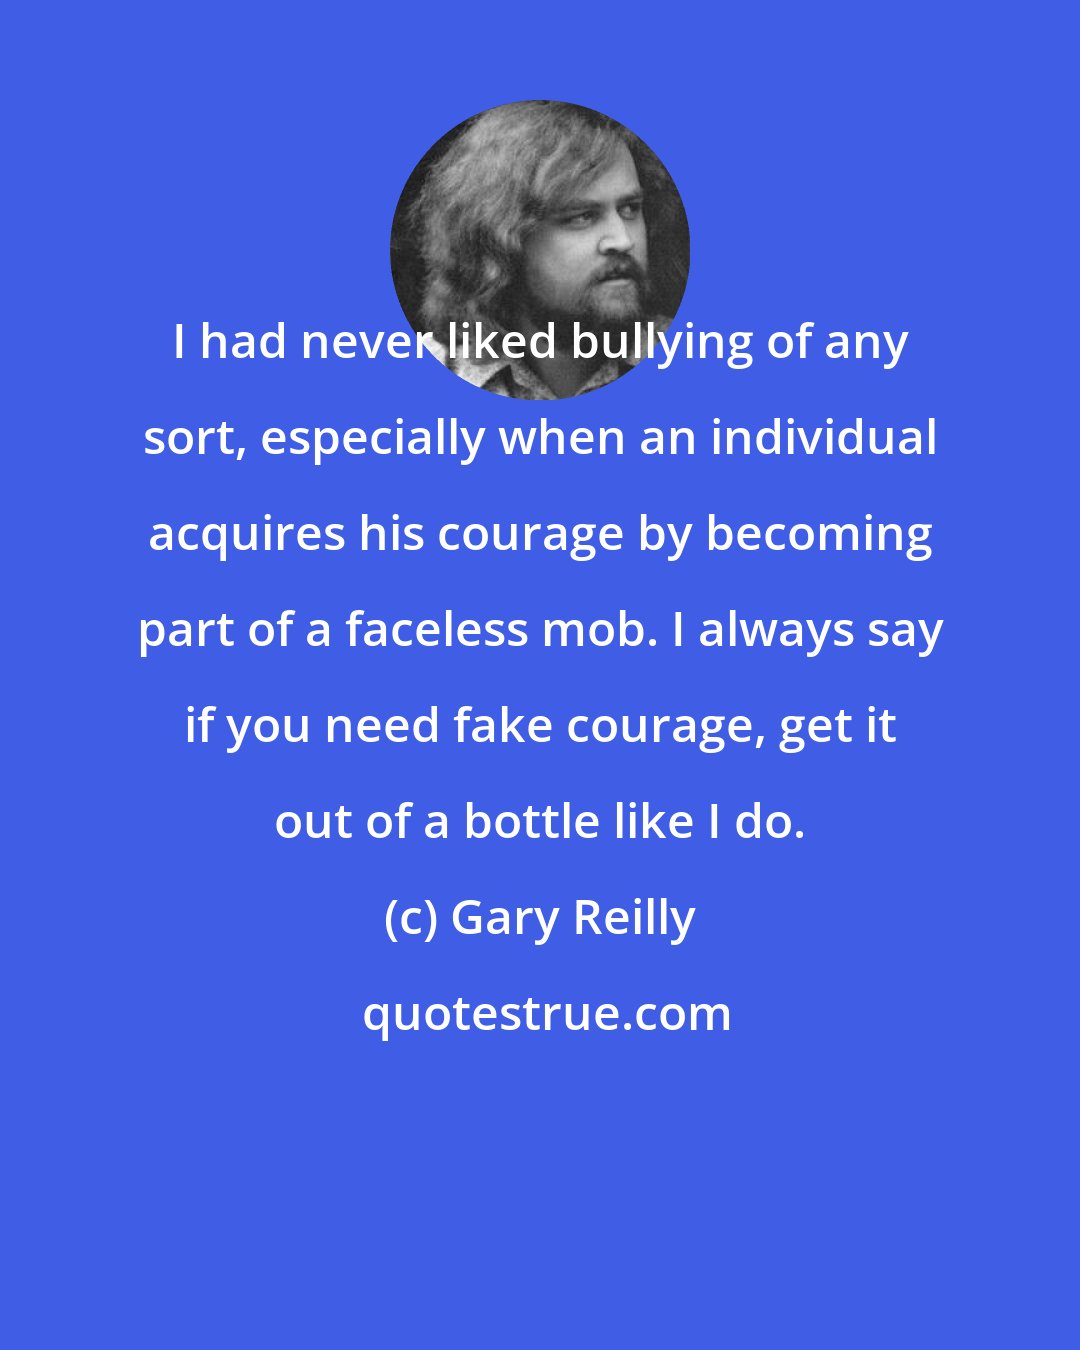 Gary Reilly: I had never liked bullying of any sort, especially when an individual acquires his courage by becoming part of a faceless mob. I always say if you need fake courage, get it out of a bottle like I do.